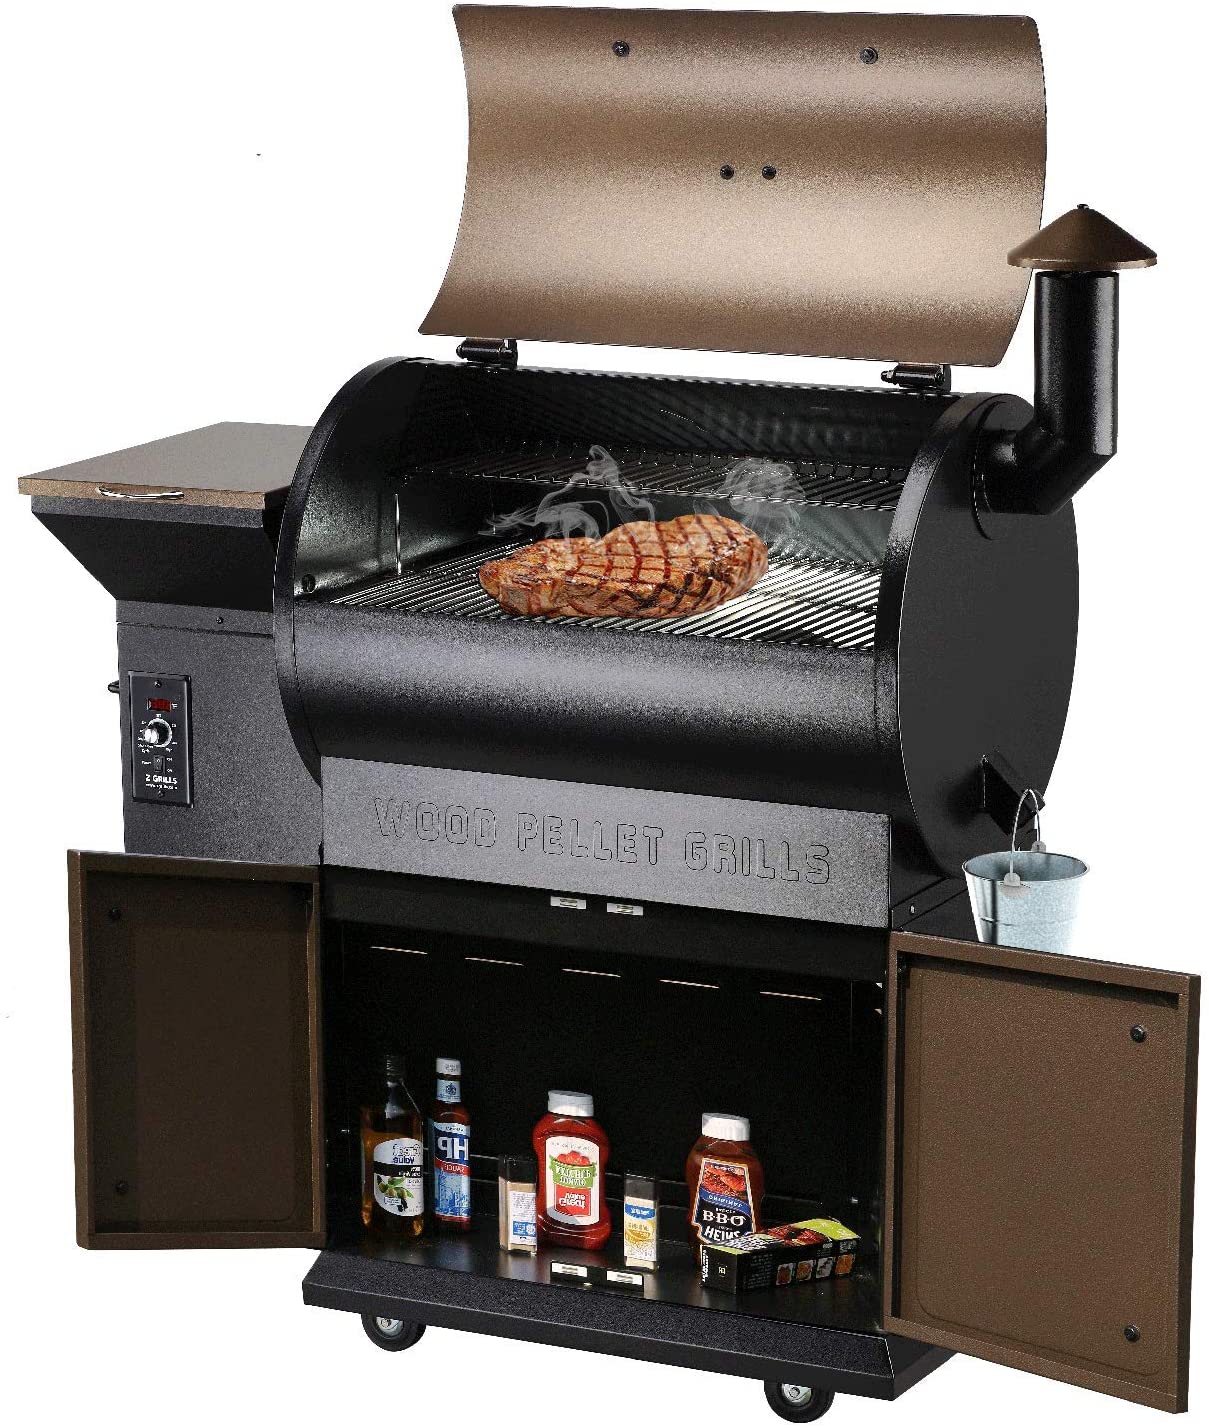 Z GRILLS 700 sq in Wood Pellet Barbecue Grill and Smoker Family Size Outdoor Cooking 8 in 1 Smart BBQ Grill - image 3 of 7